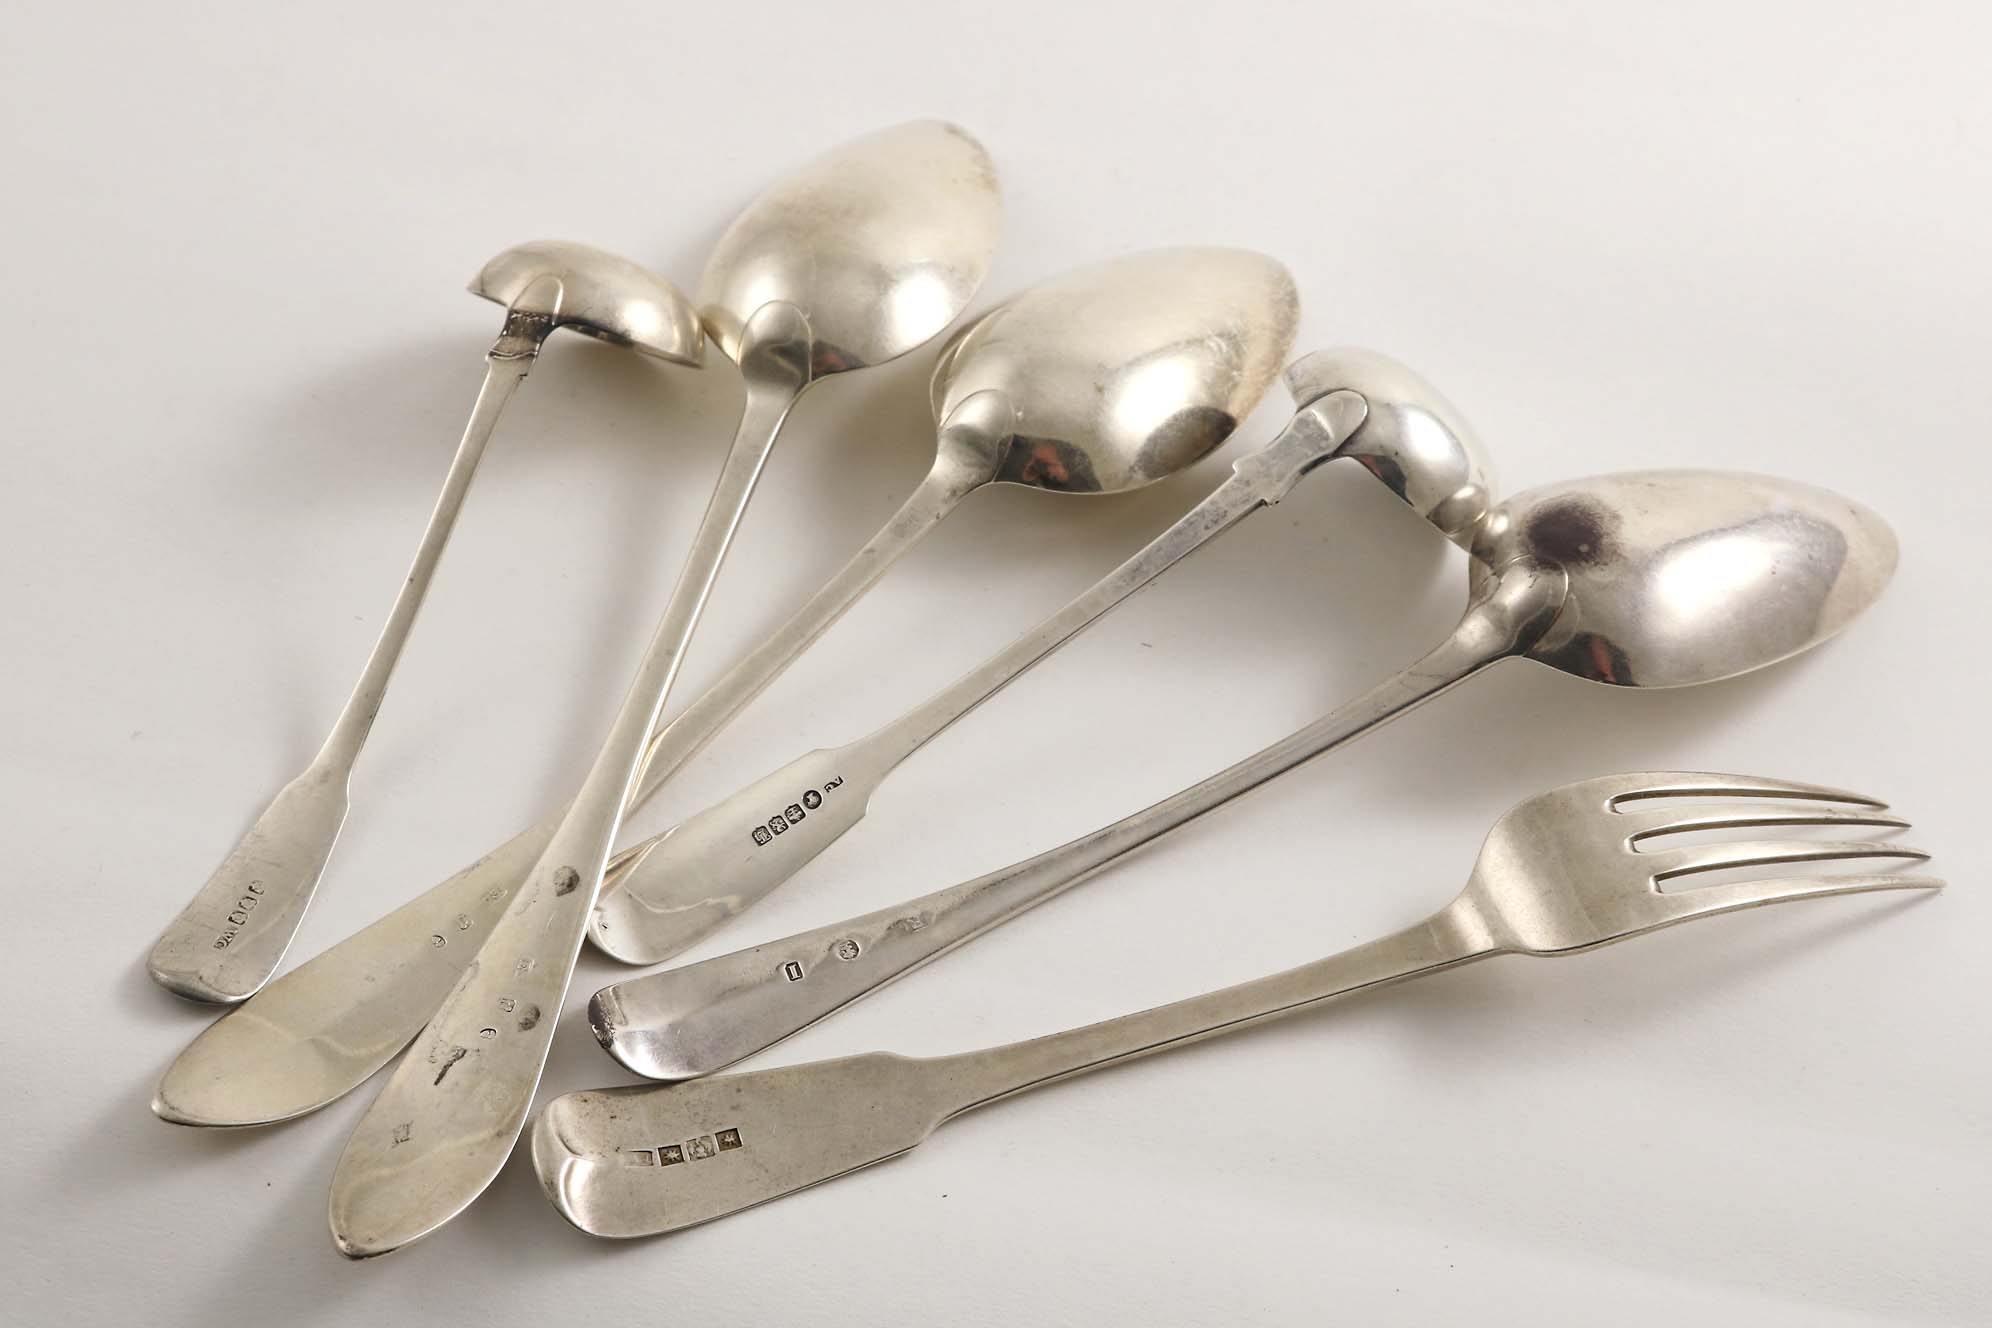 SCOTTISH PROVINCIAL FLATWARE:- A small Fiddle toddy ladle by William Constable of Dundee (pot of